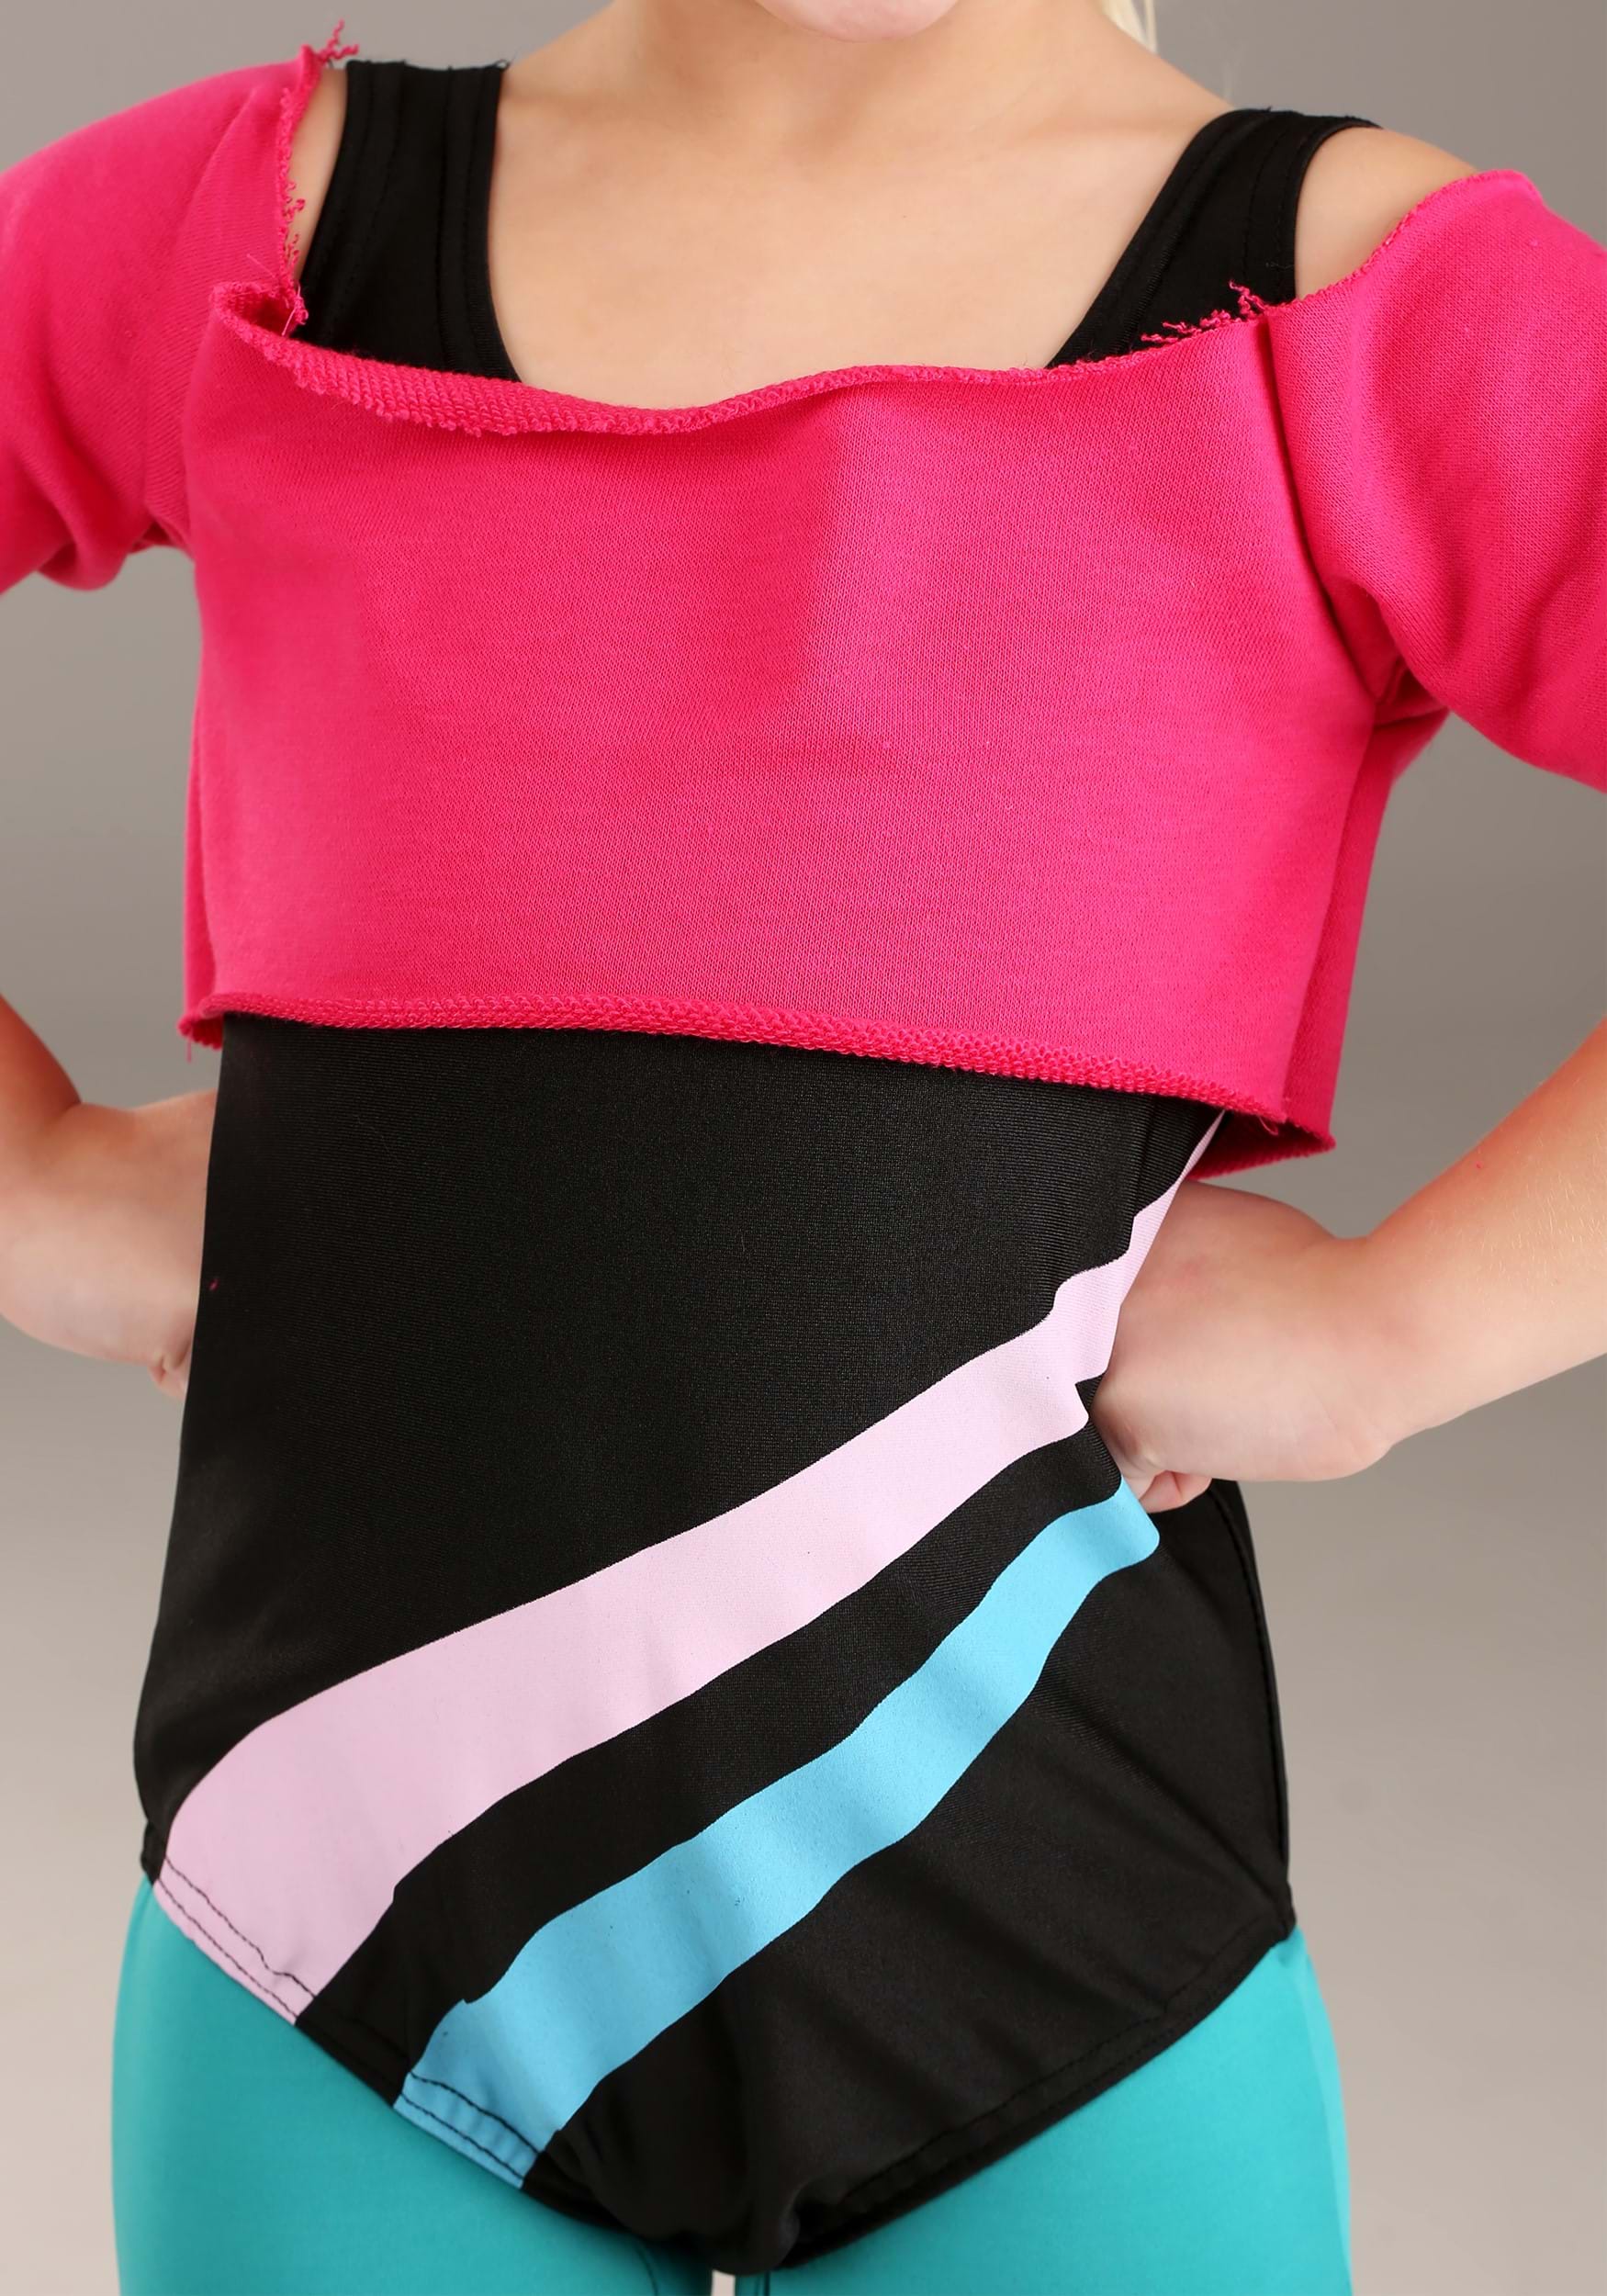 80s Workout Outfit - Pink & Black